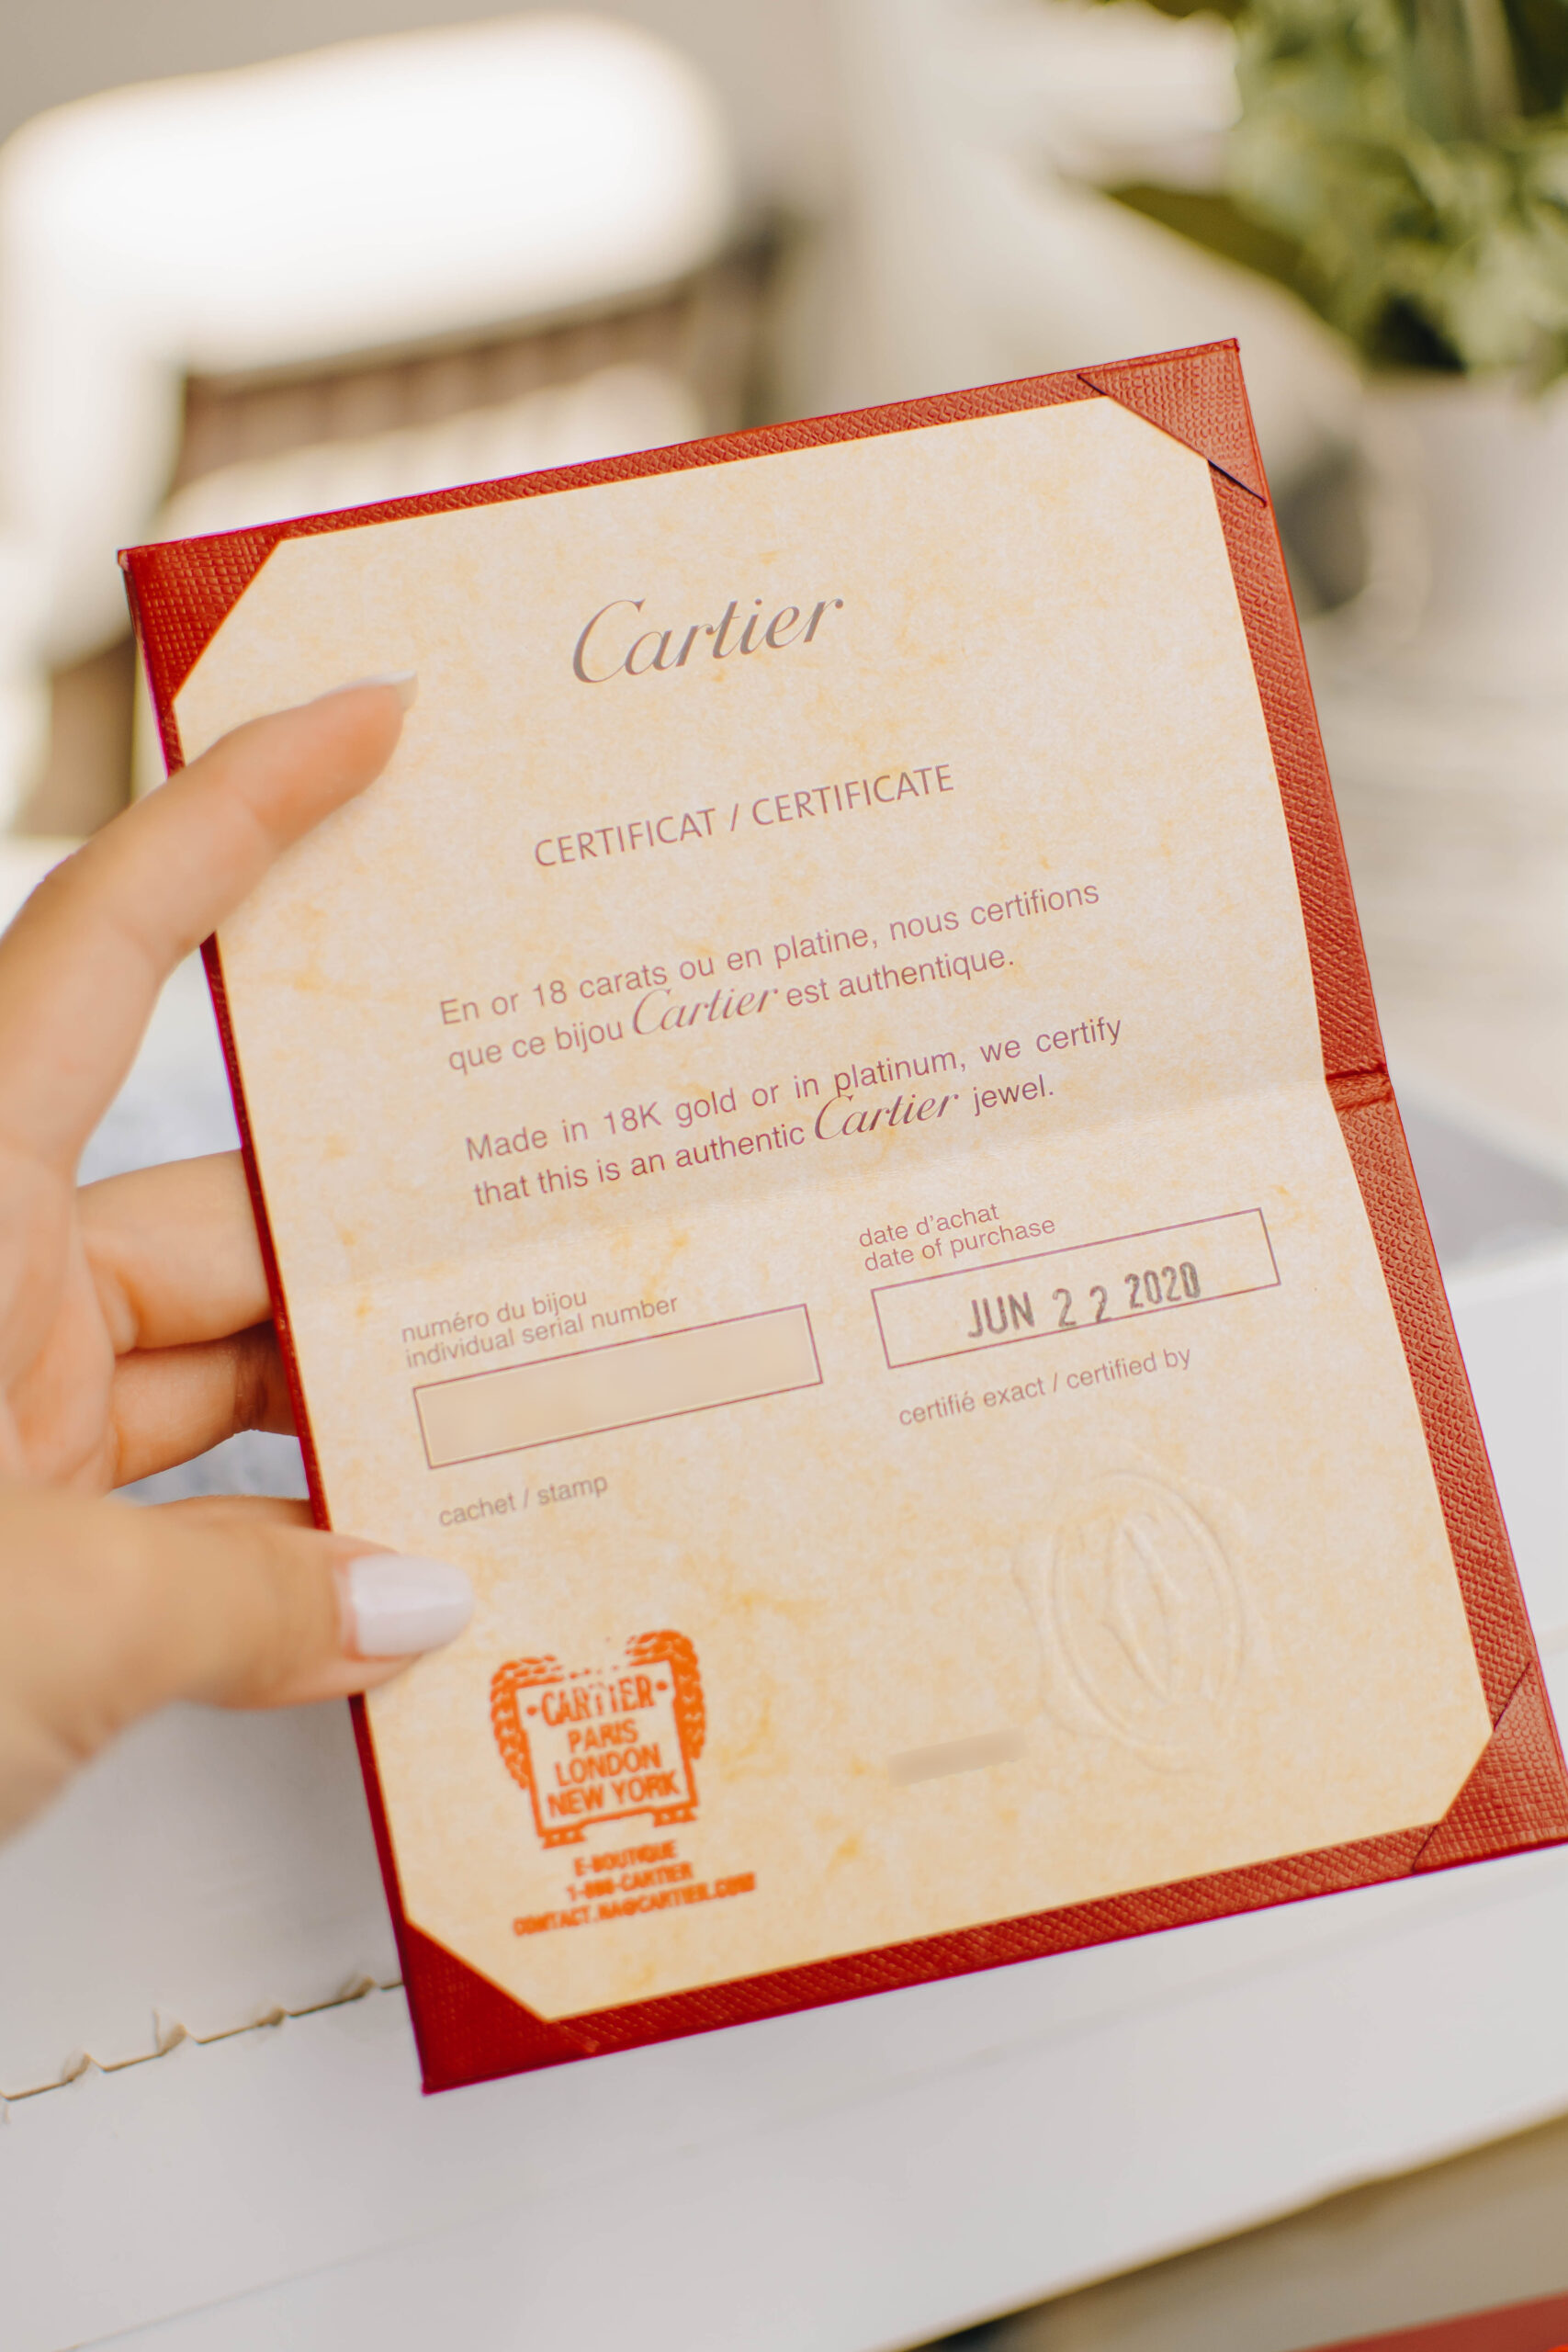 Cartier Certificate for Authenticity.